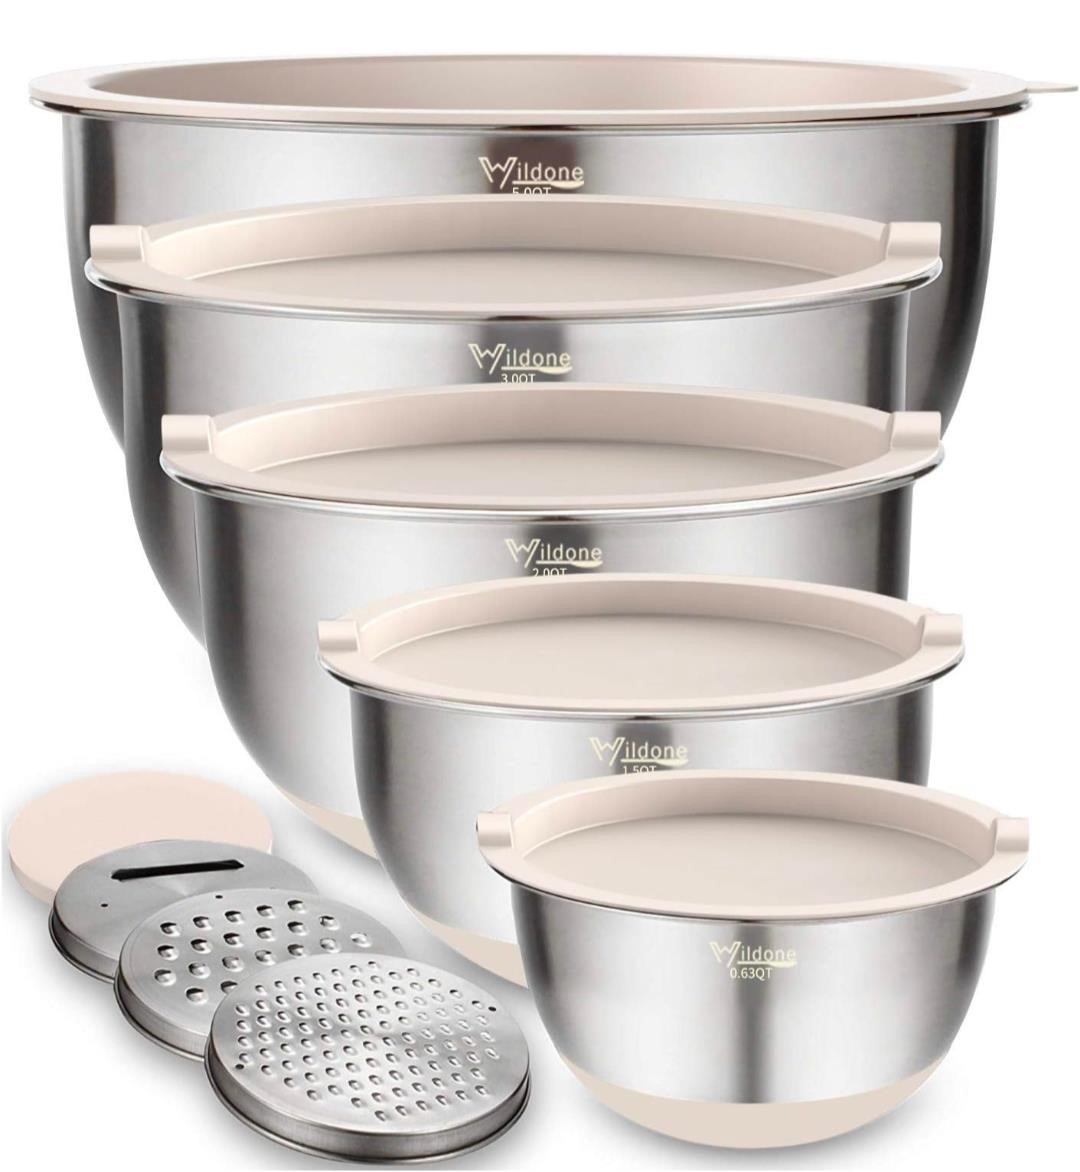 ($110) Mixing Bowls Set of 5, Wildone Stainless